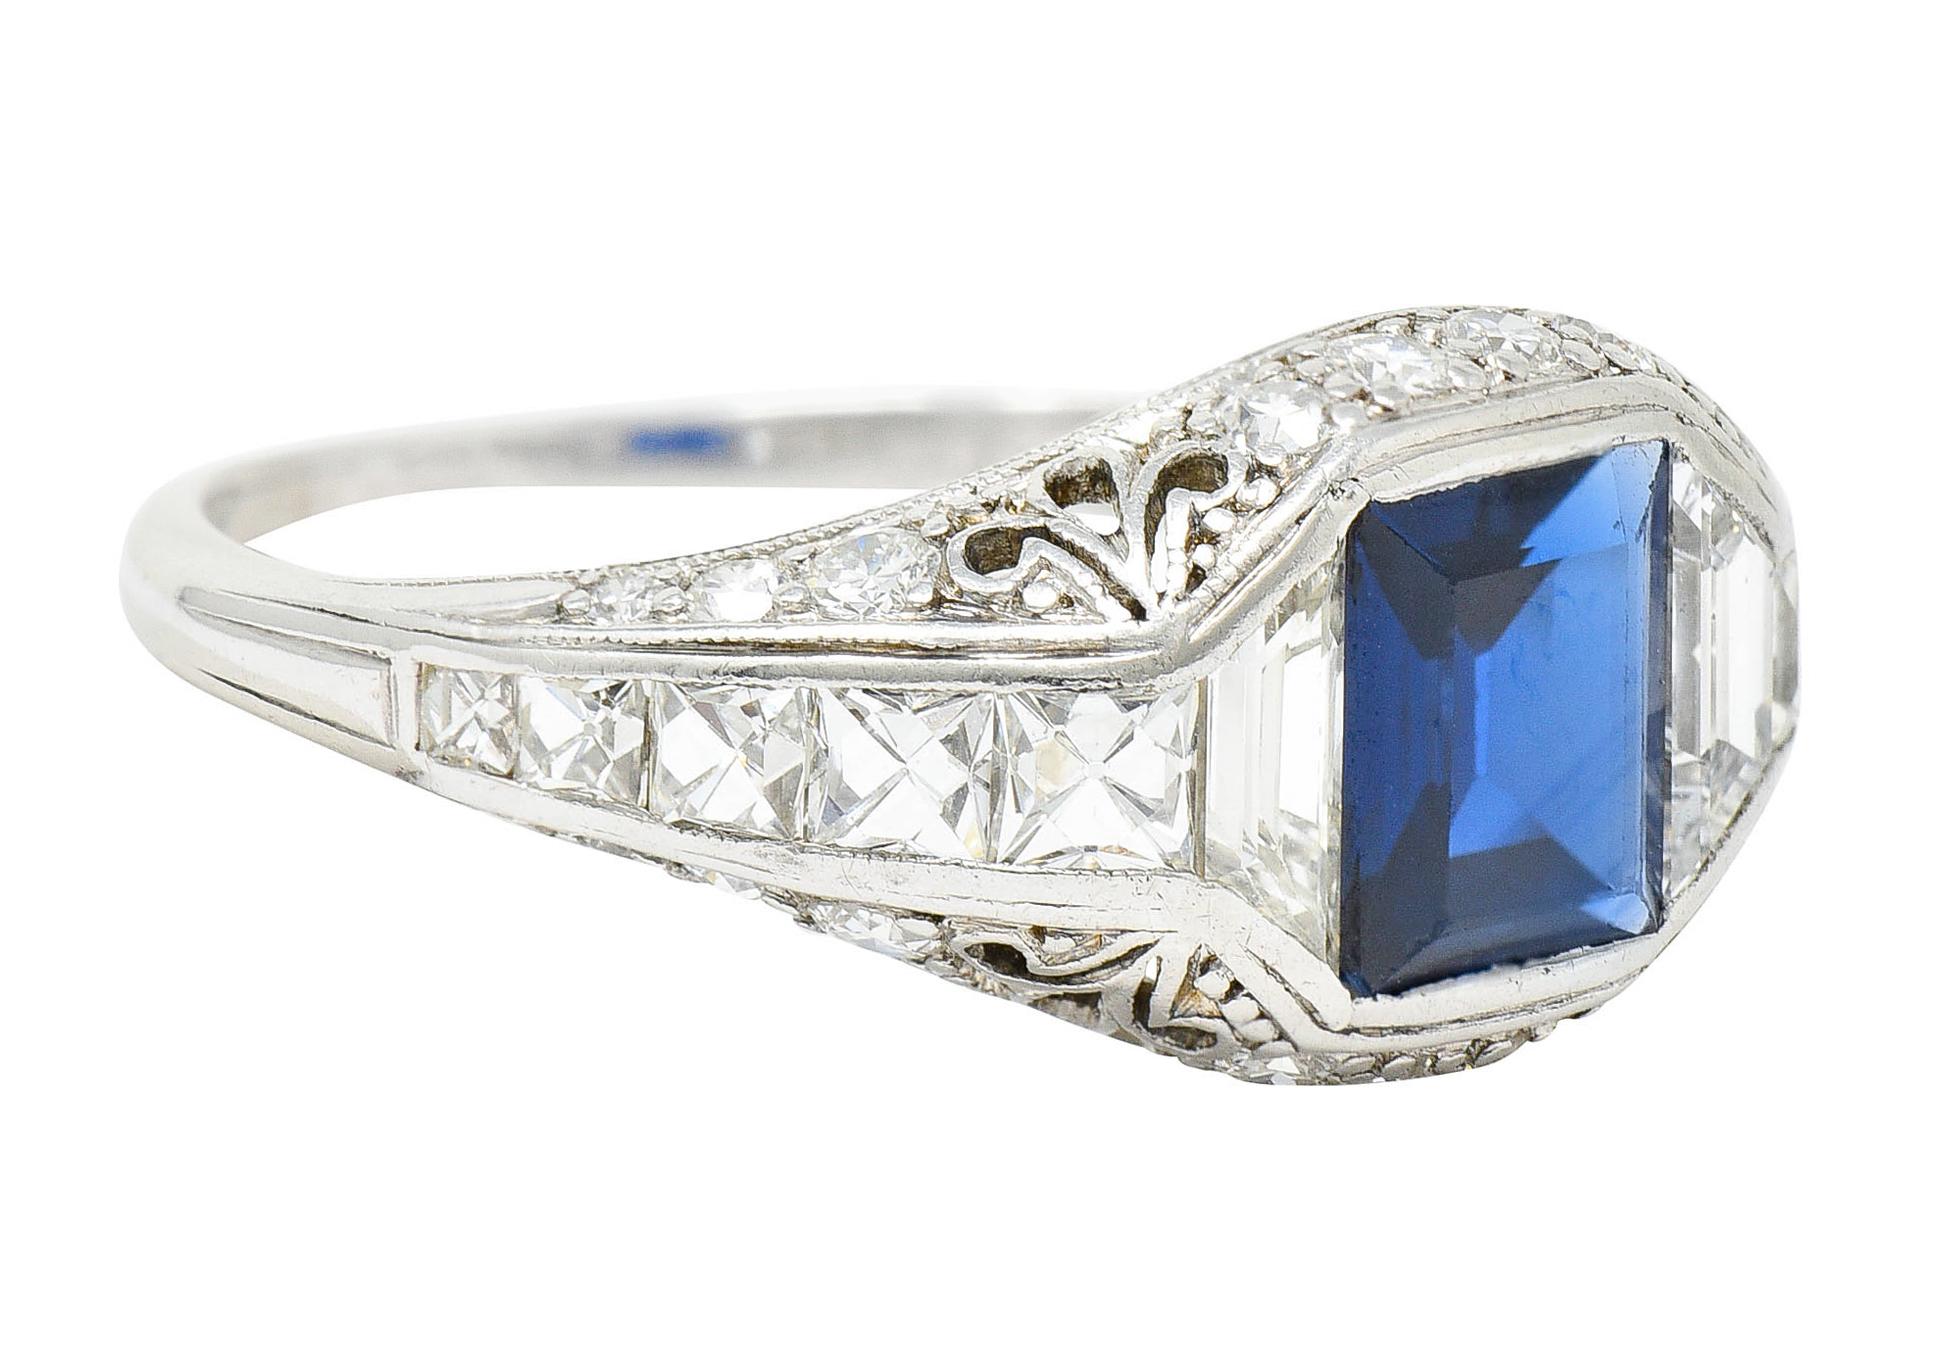 Bombè band features a rectangular cut sapphire weighing approximately 2.00 carats

Transparent with saturated and uniform medium dark royal blue color

Flanked by trapezoid and French cut diamonds weighing in total approximately 1.25 carats

With